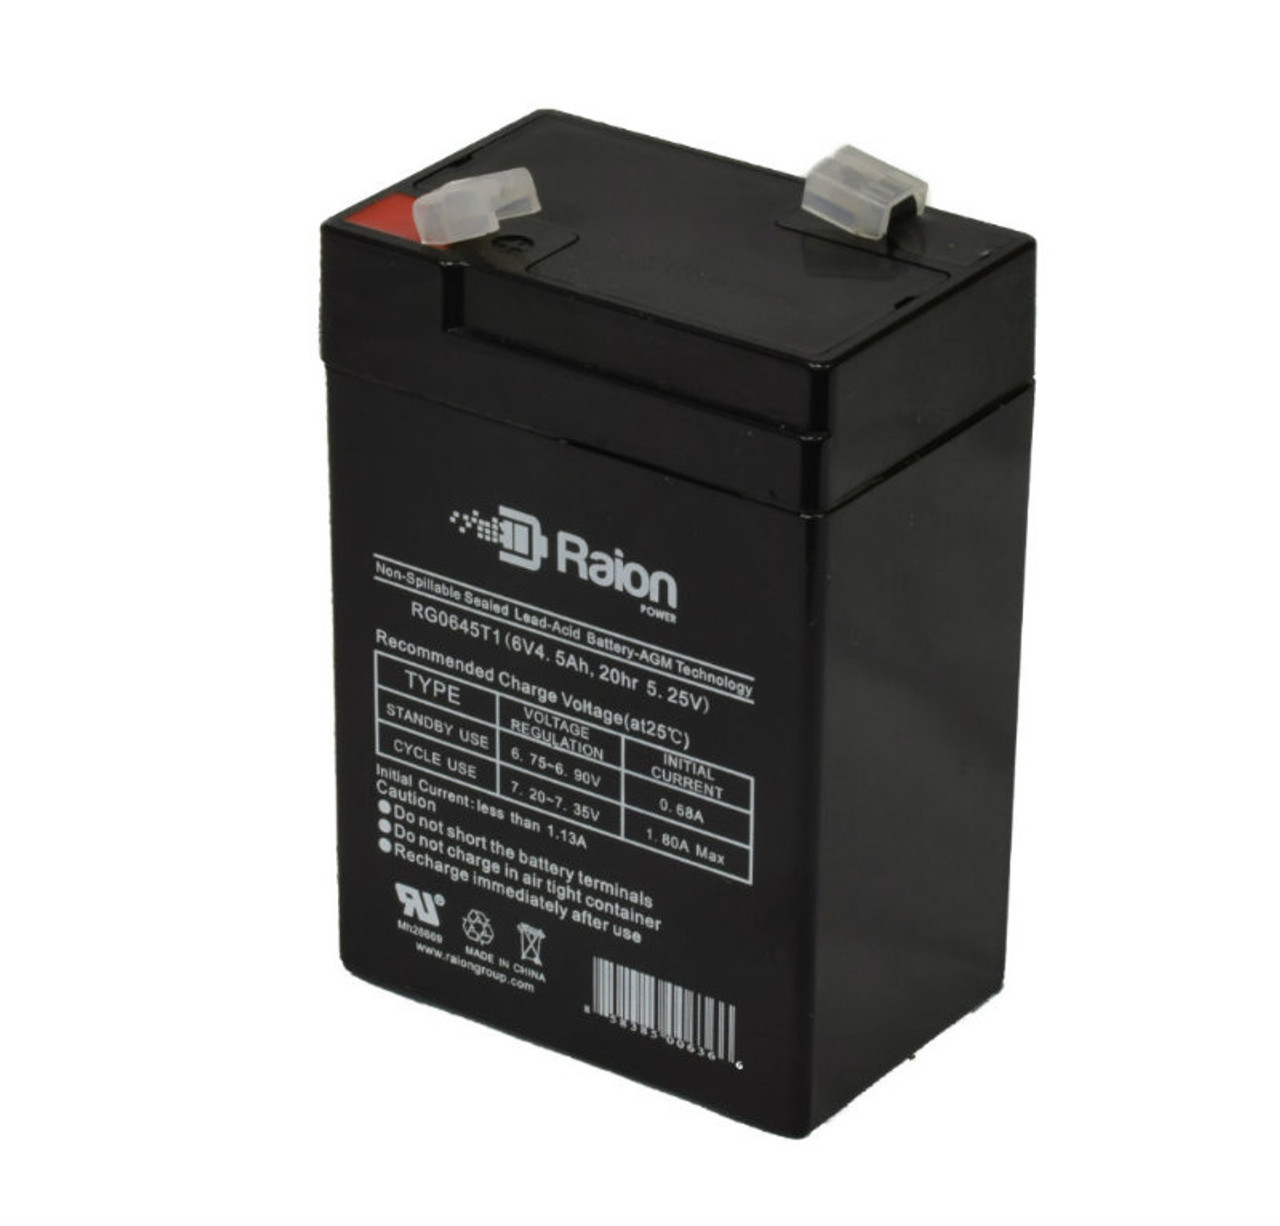 Raion Power RG0645T1 6V 4.5Ah Replacement Battery Cartridge for Baxter Healthcare 821 Microate Inf Pump